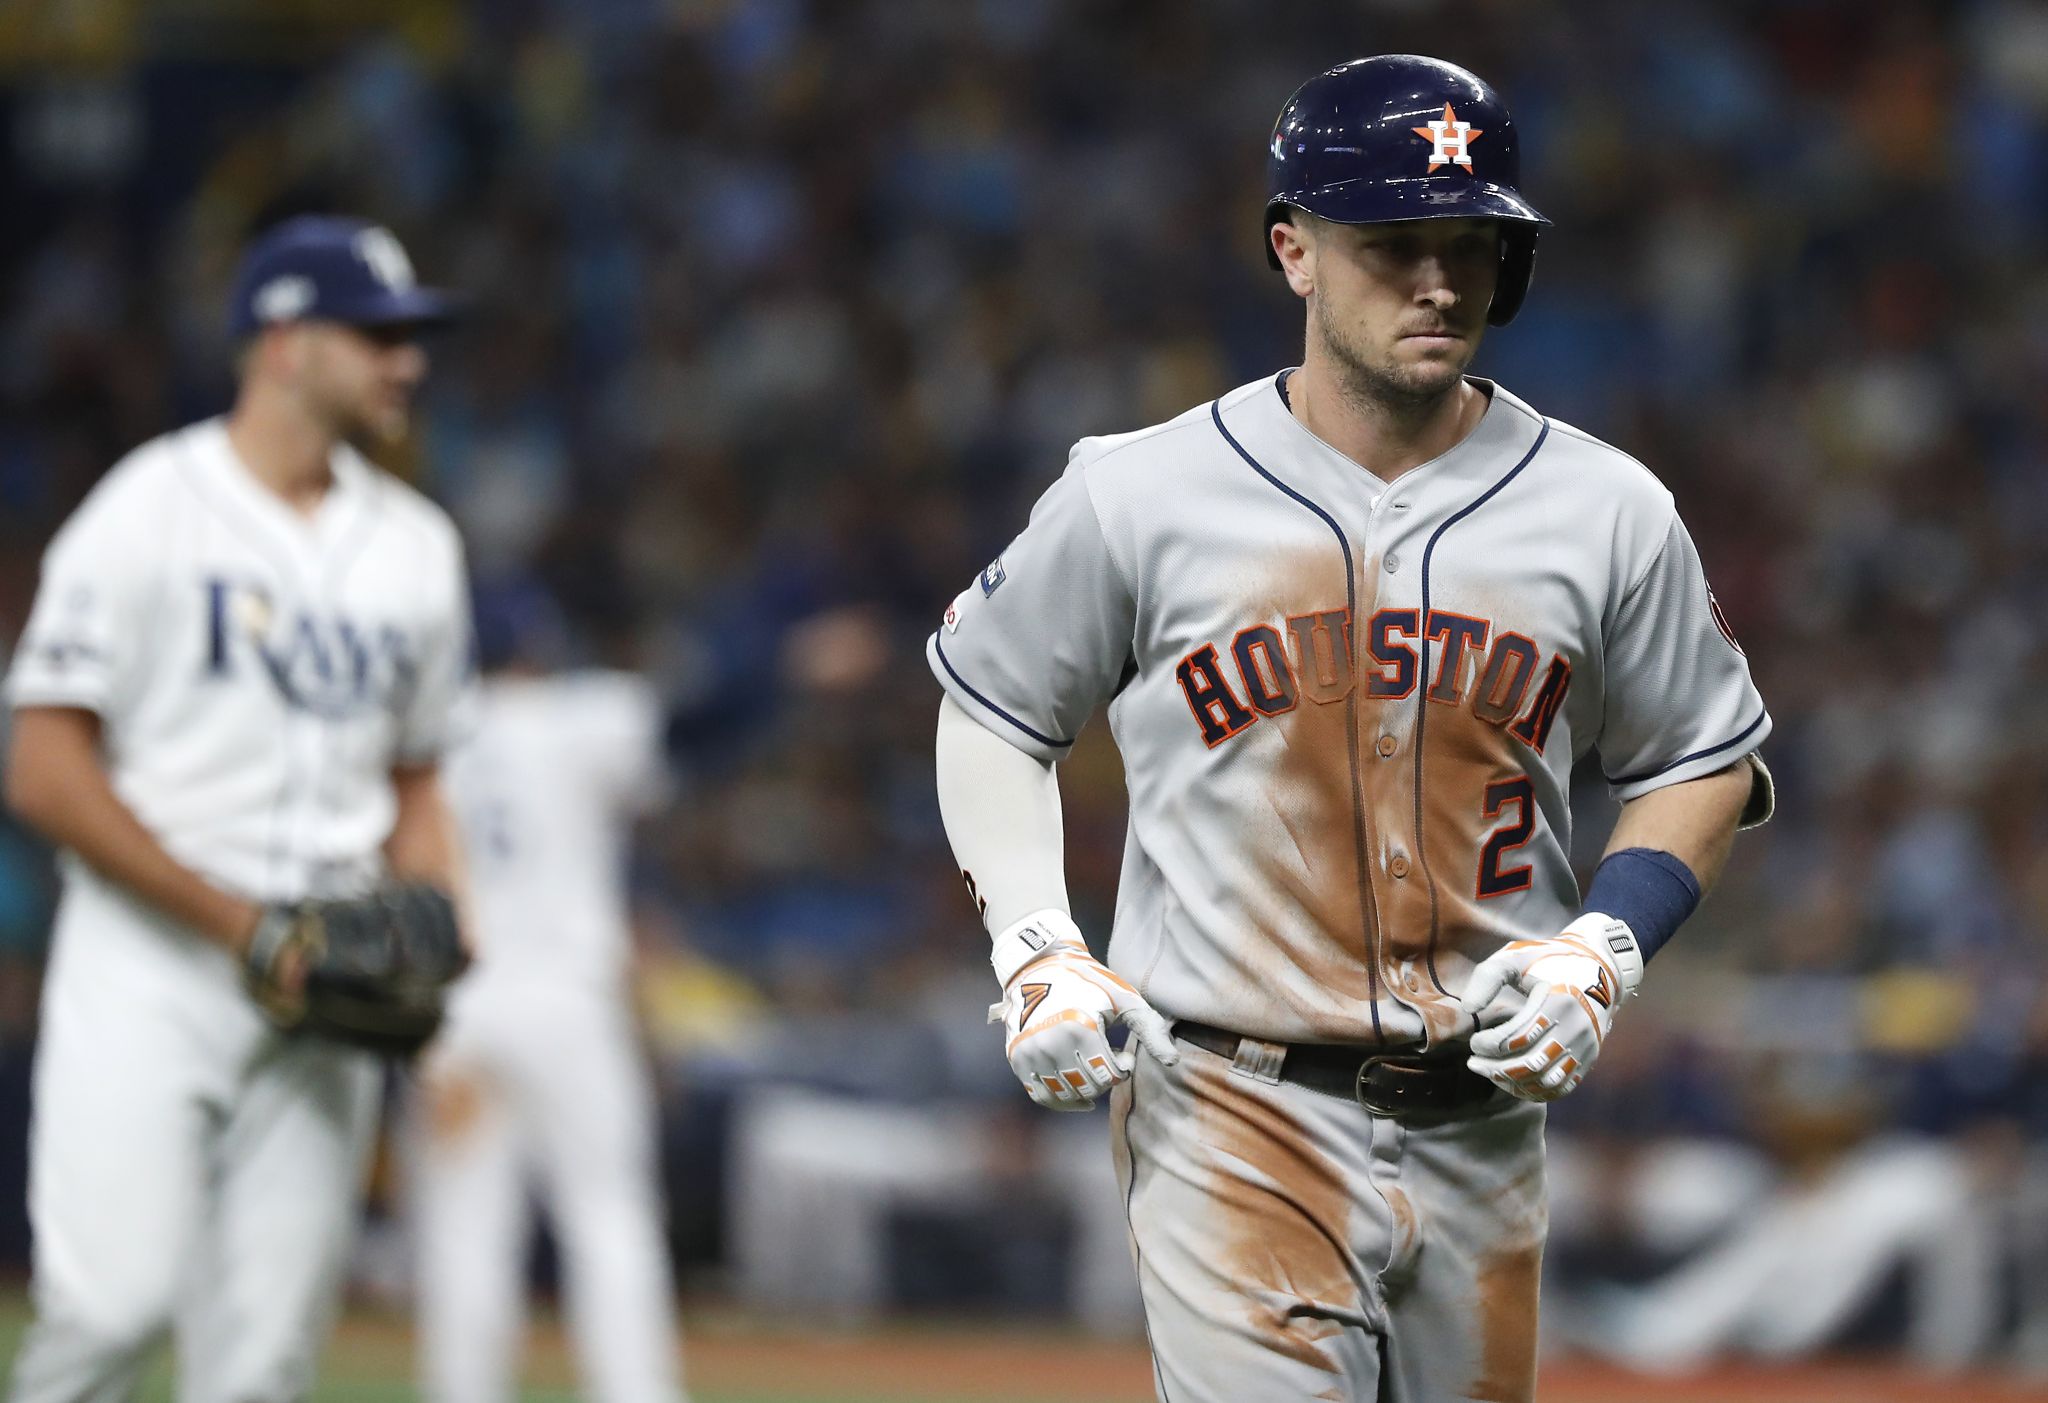 Creech: Astros must find a solution, close out series